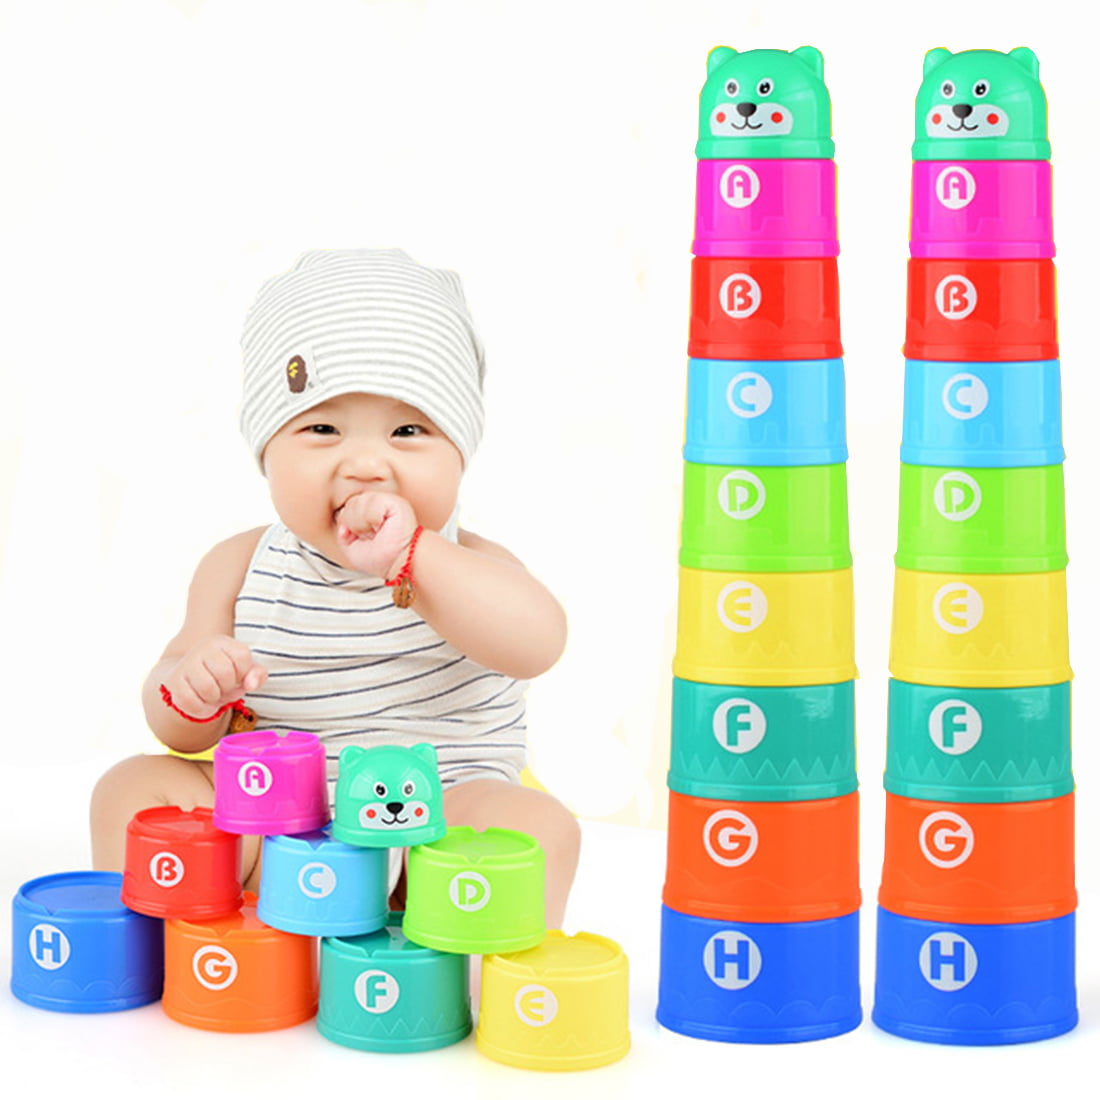 for Indoor Bathtub 9 Pieces Outdoor with ABC Characters and Numbers Kidsthrill Educational Rainbow Stacking & Nesting Cups Baby Building Set and Beach Fun Toy Multi Colors 